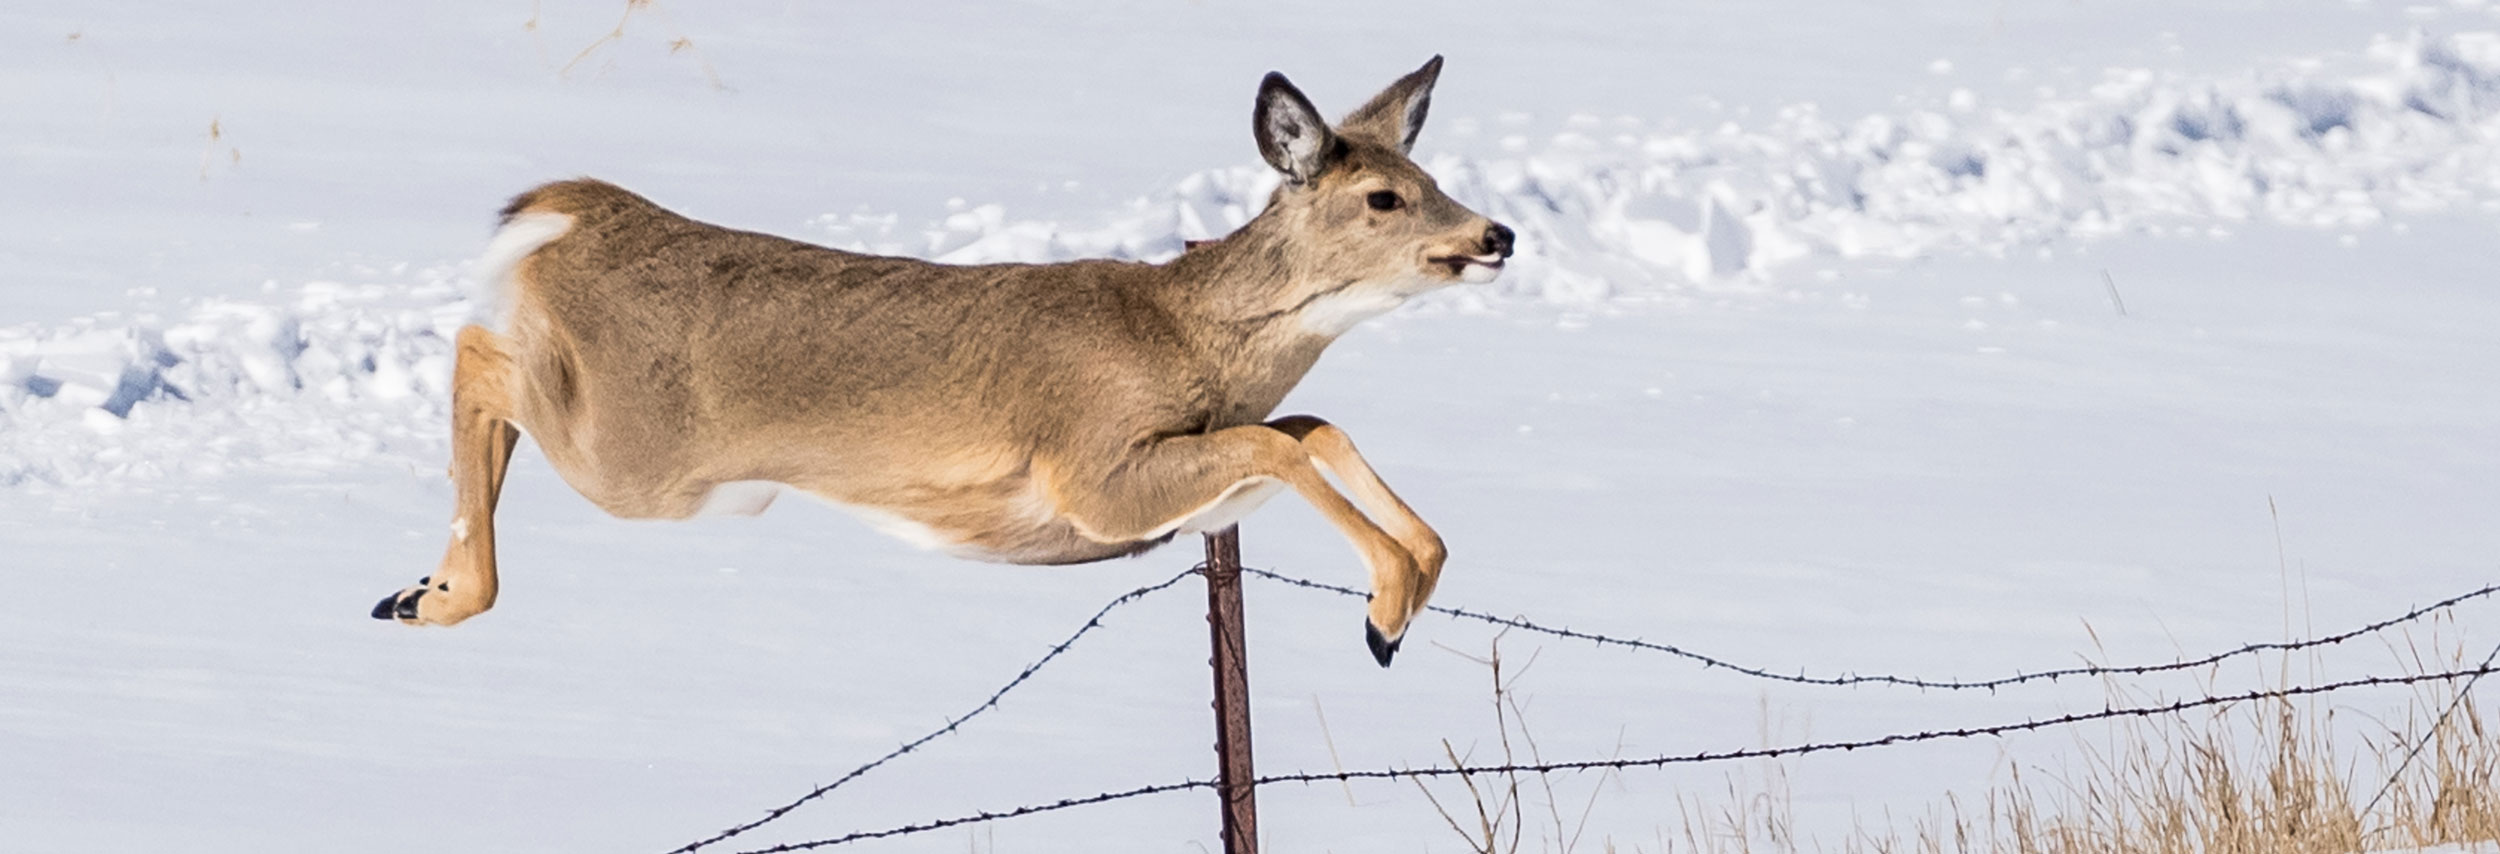 Whtie-tailed deer jumping fence